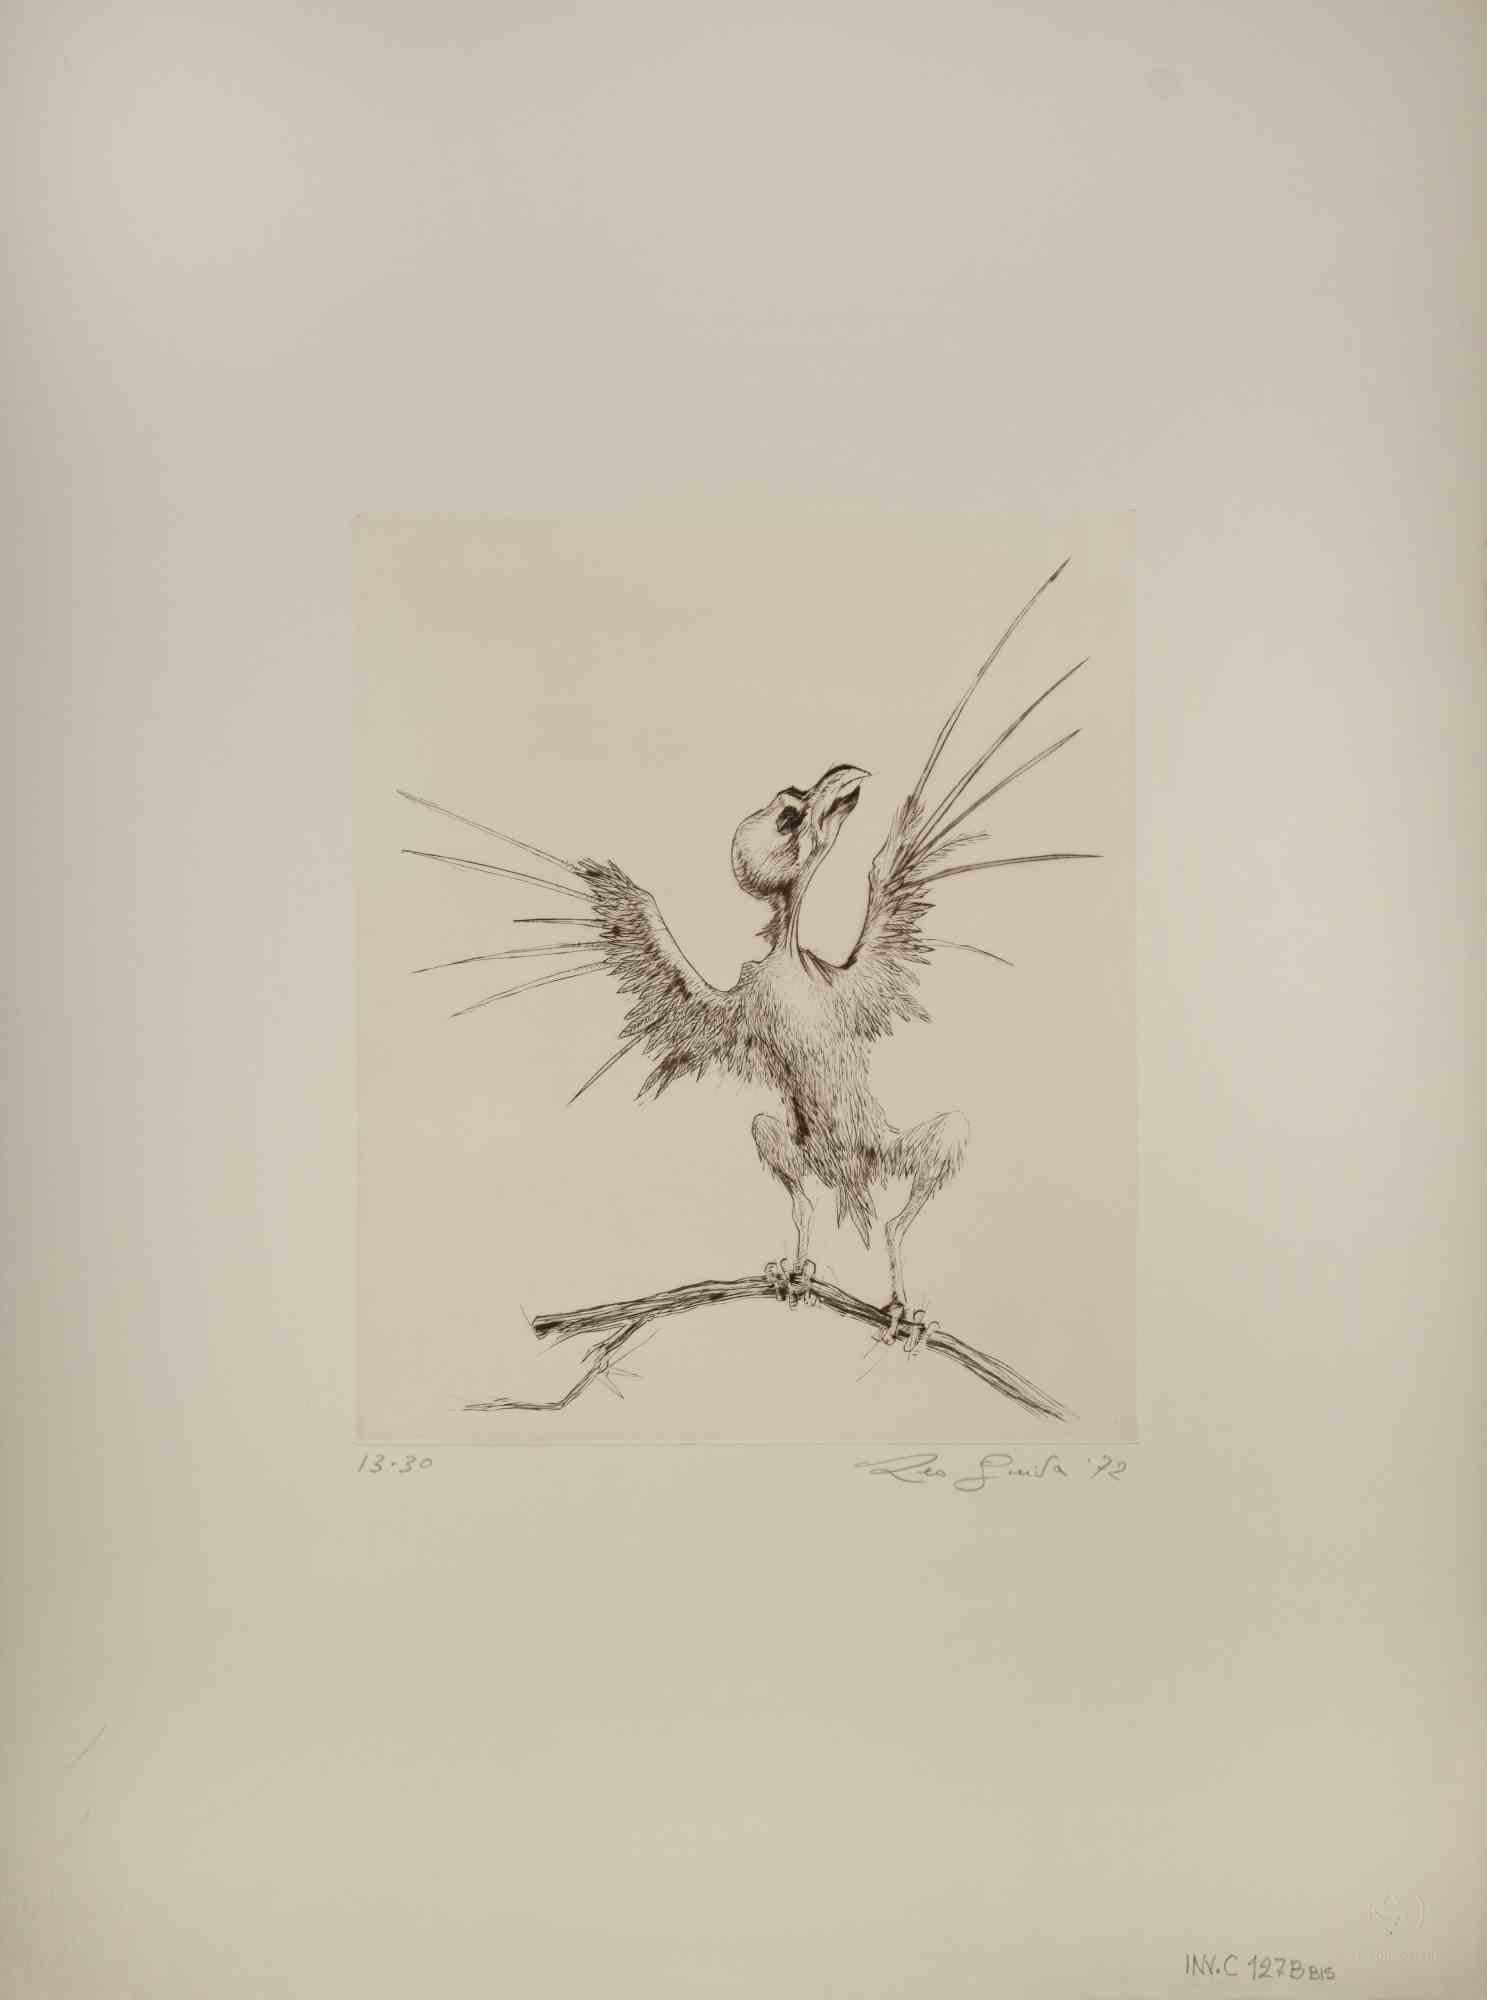 Bird is a Contemporary artwork realized  in 1972  by the italian Contemporary artist  Leo Guida  (1992 - 2017).

Original black and white etching on ivory-colored cardboard.

Hand-signed, dated and numbered.

In this artwork is represented a bird.